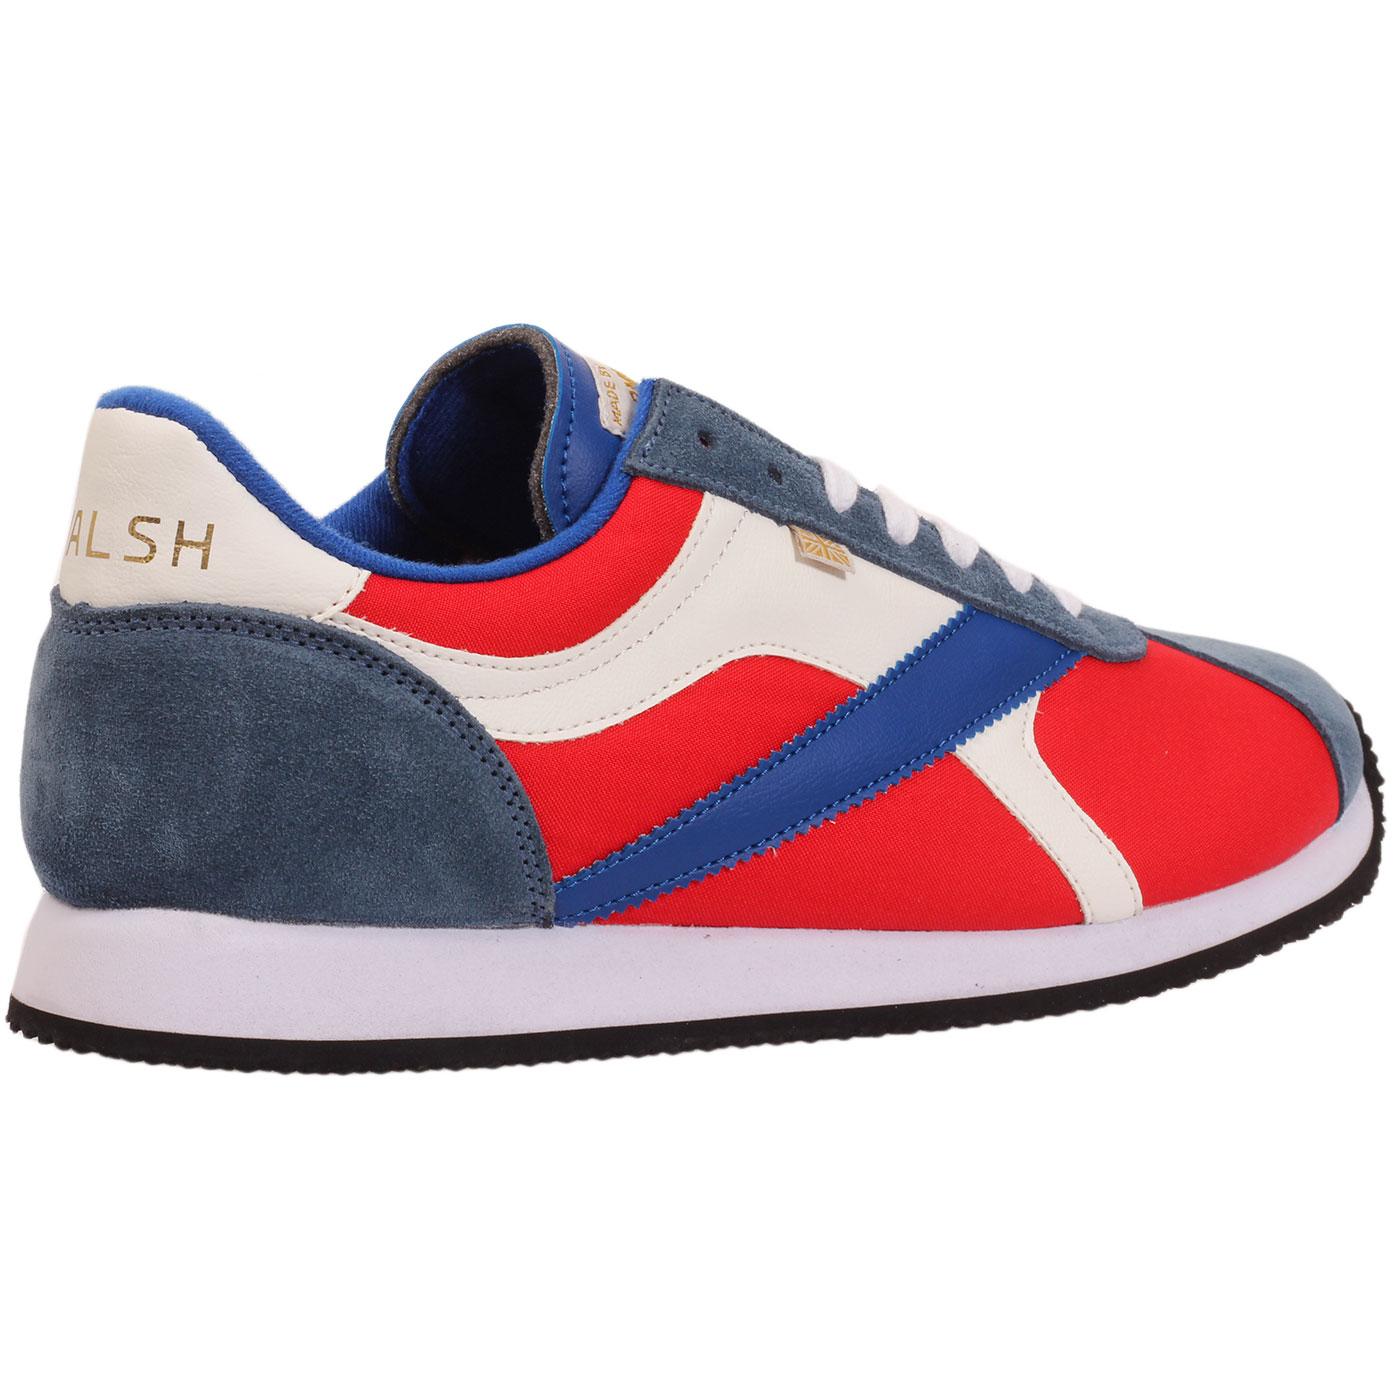 WALSH Tornado Eight3 Retro Made in England Trainers Red/Blue